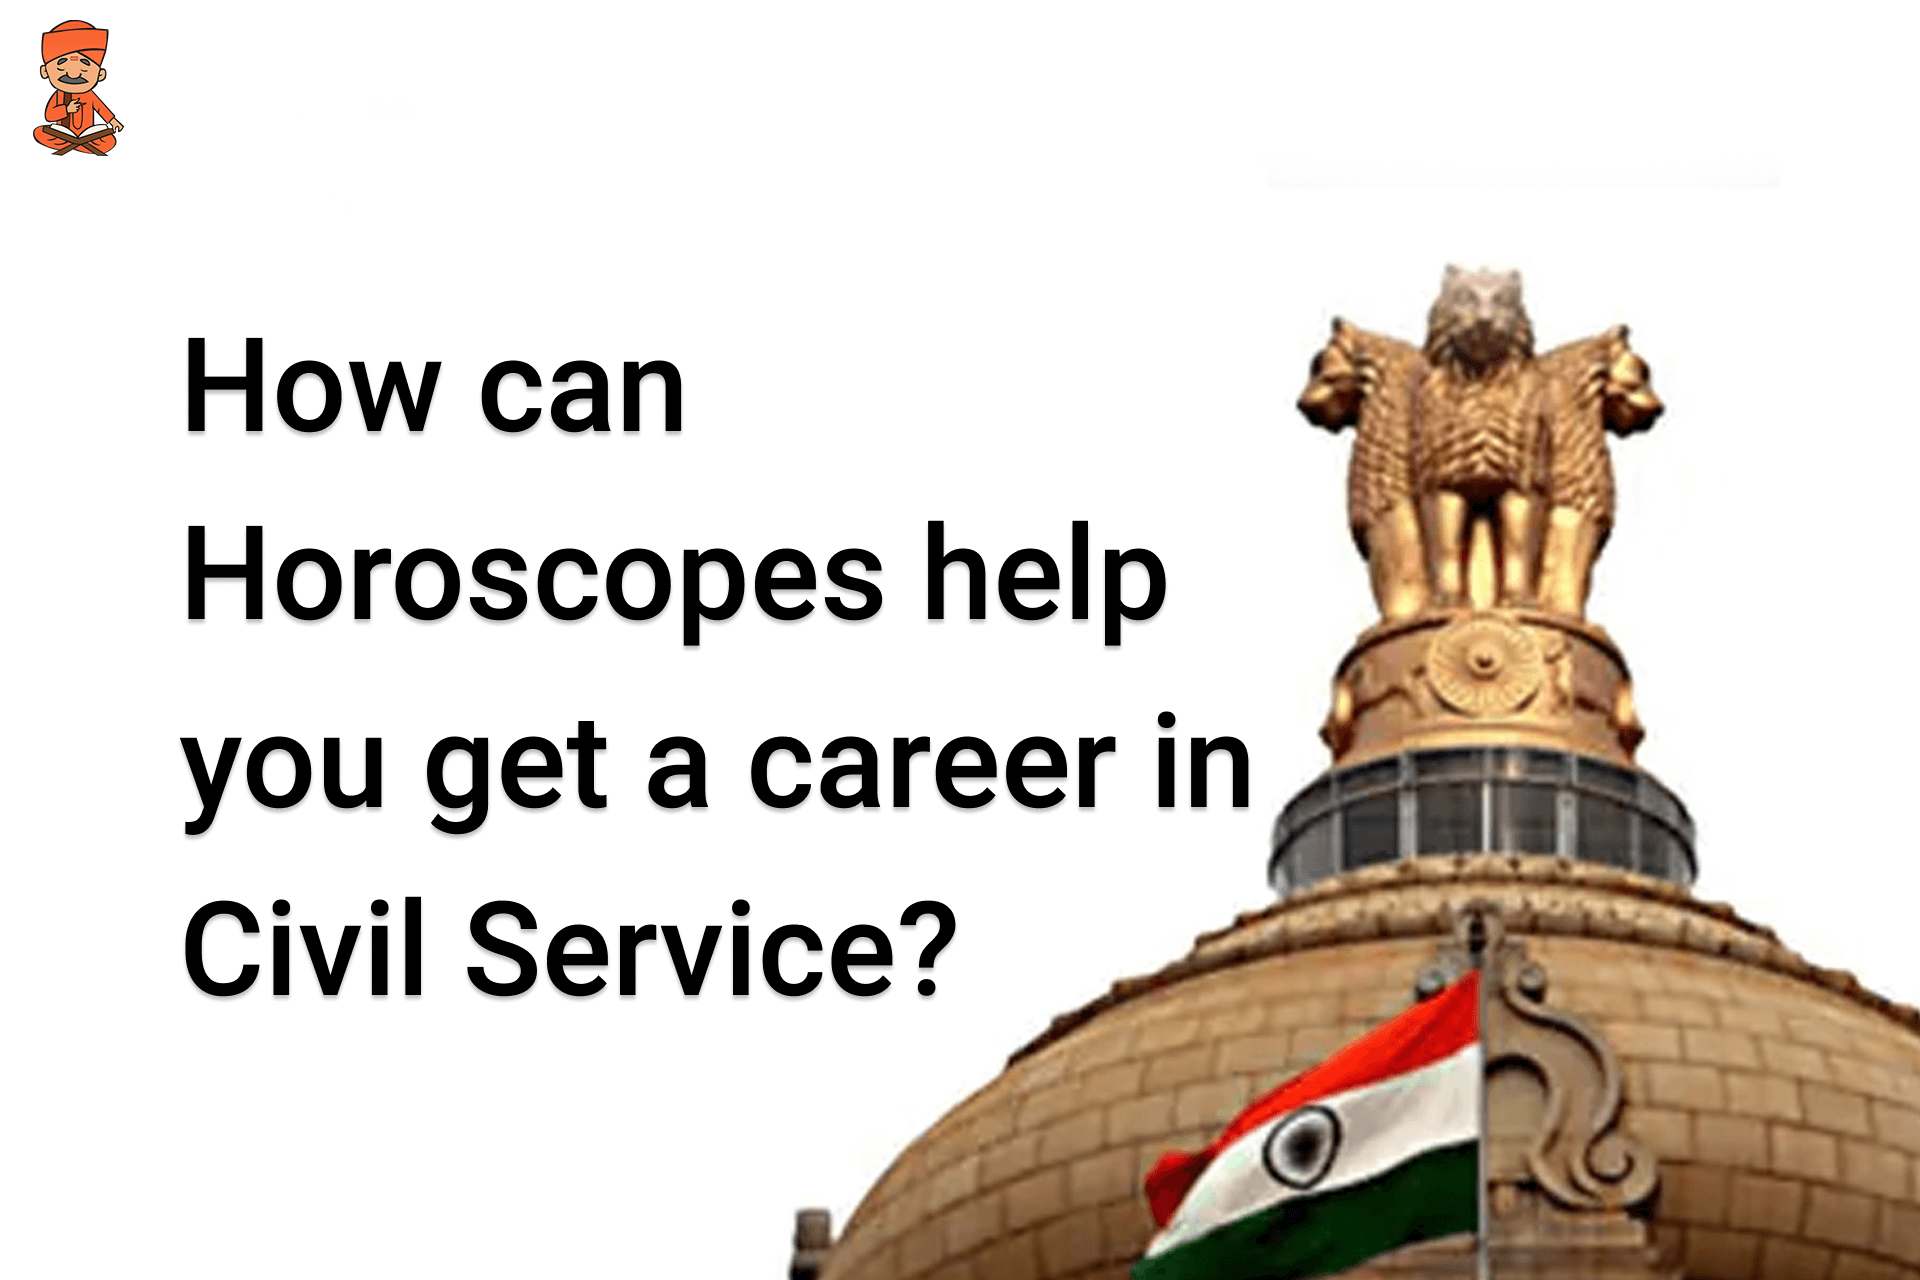 How can Horoscopes help you get a career in Civil Services?